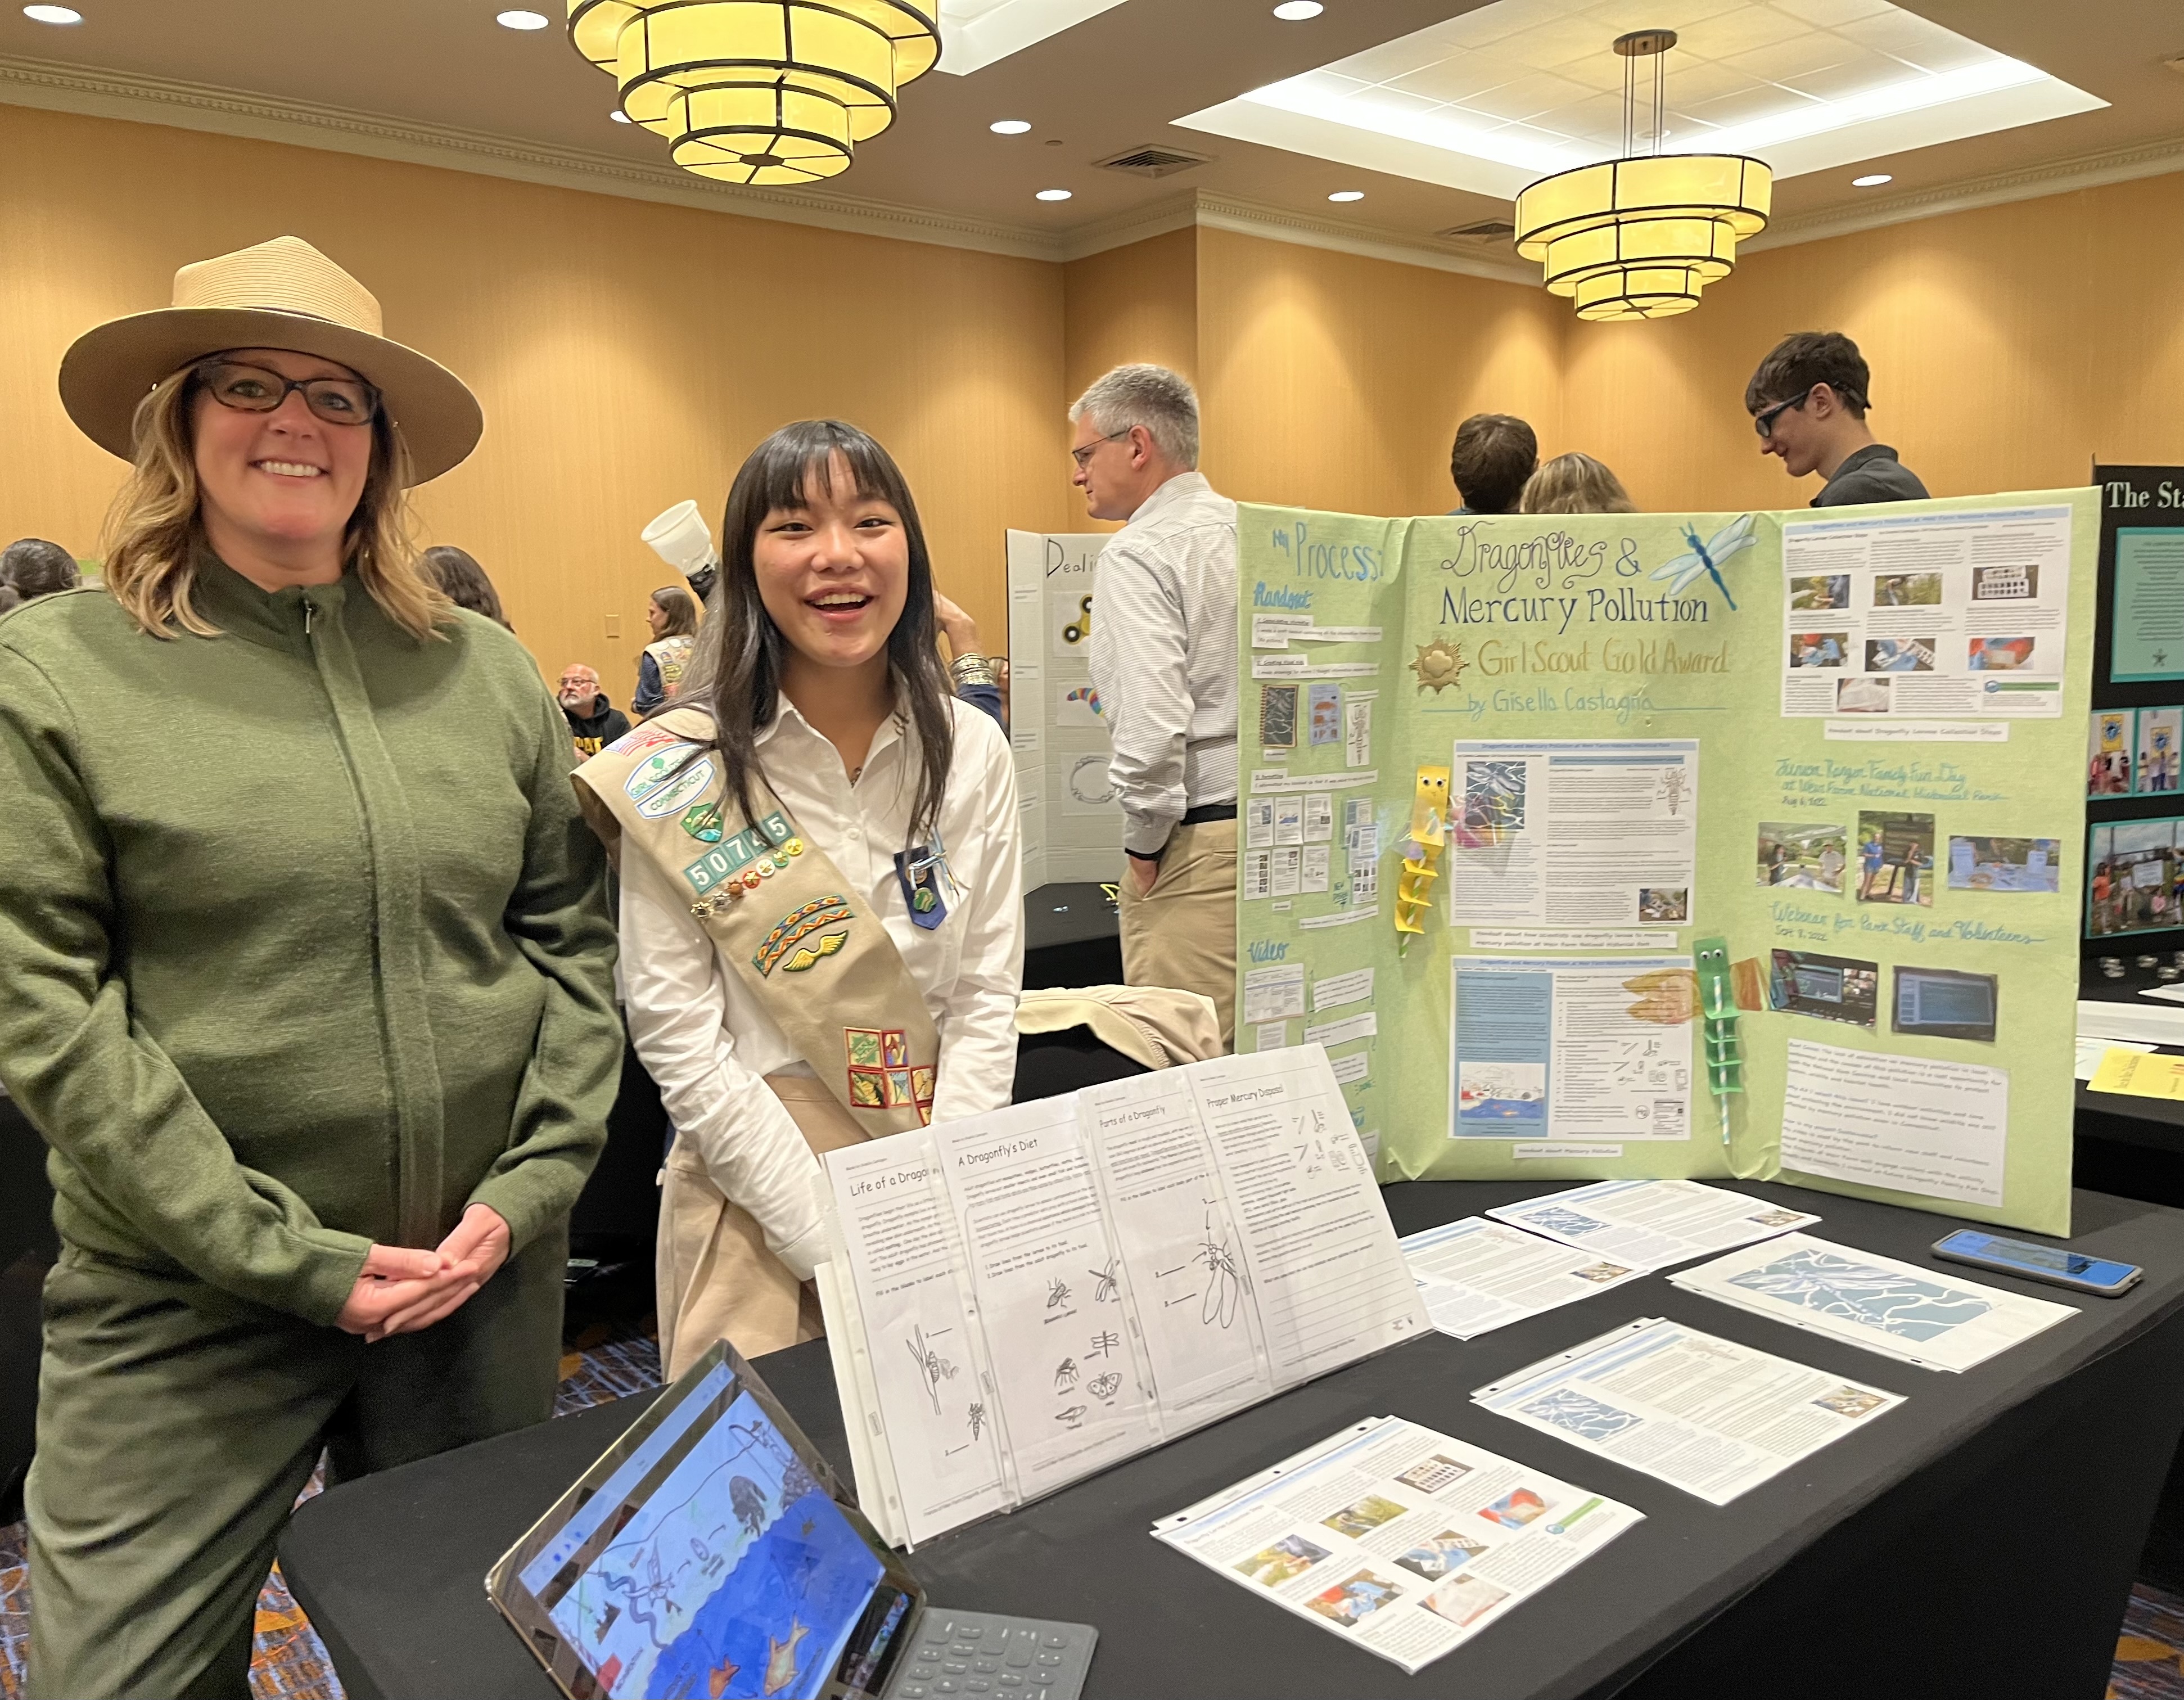 A Girl Scout and a park ranger at a table presenting research